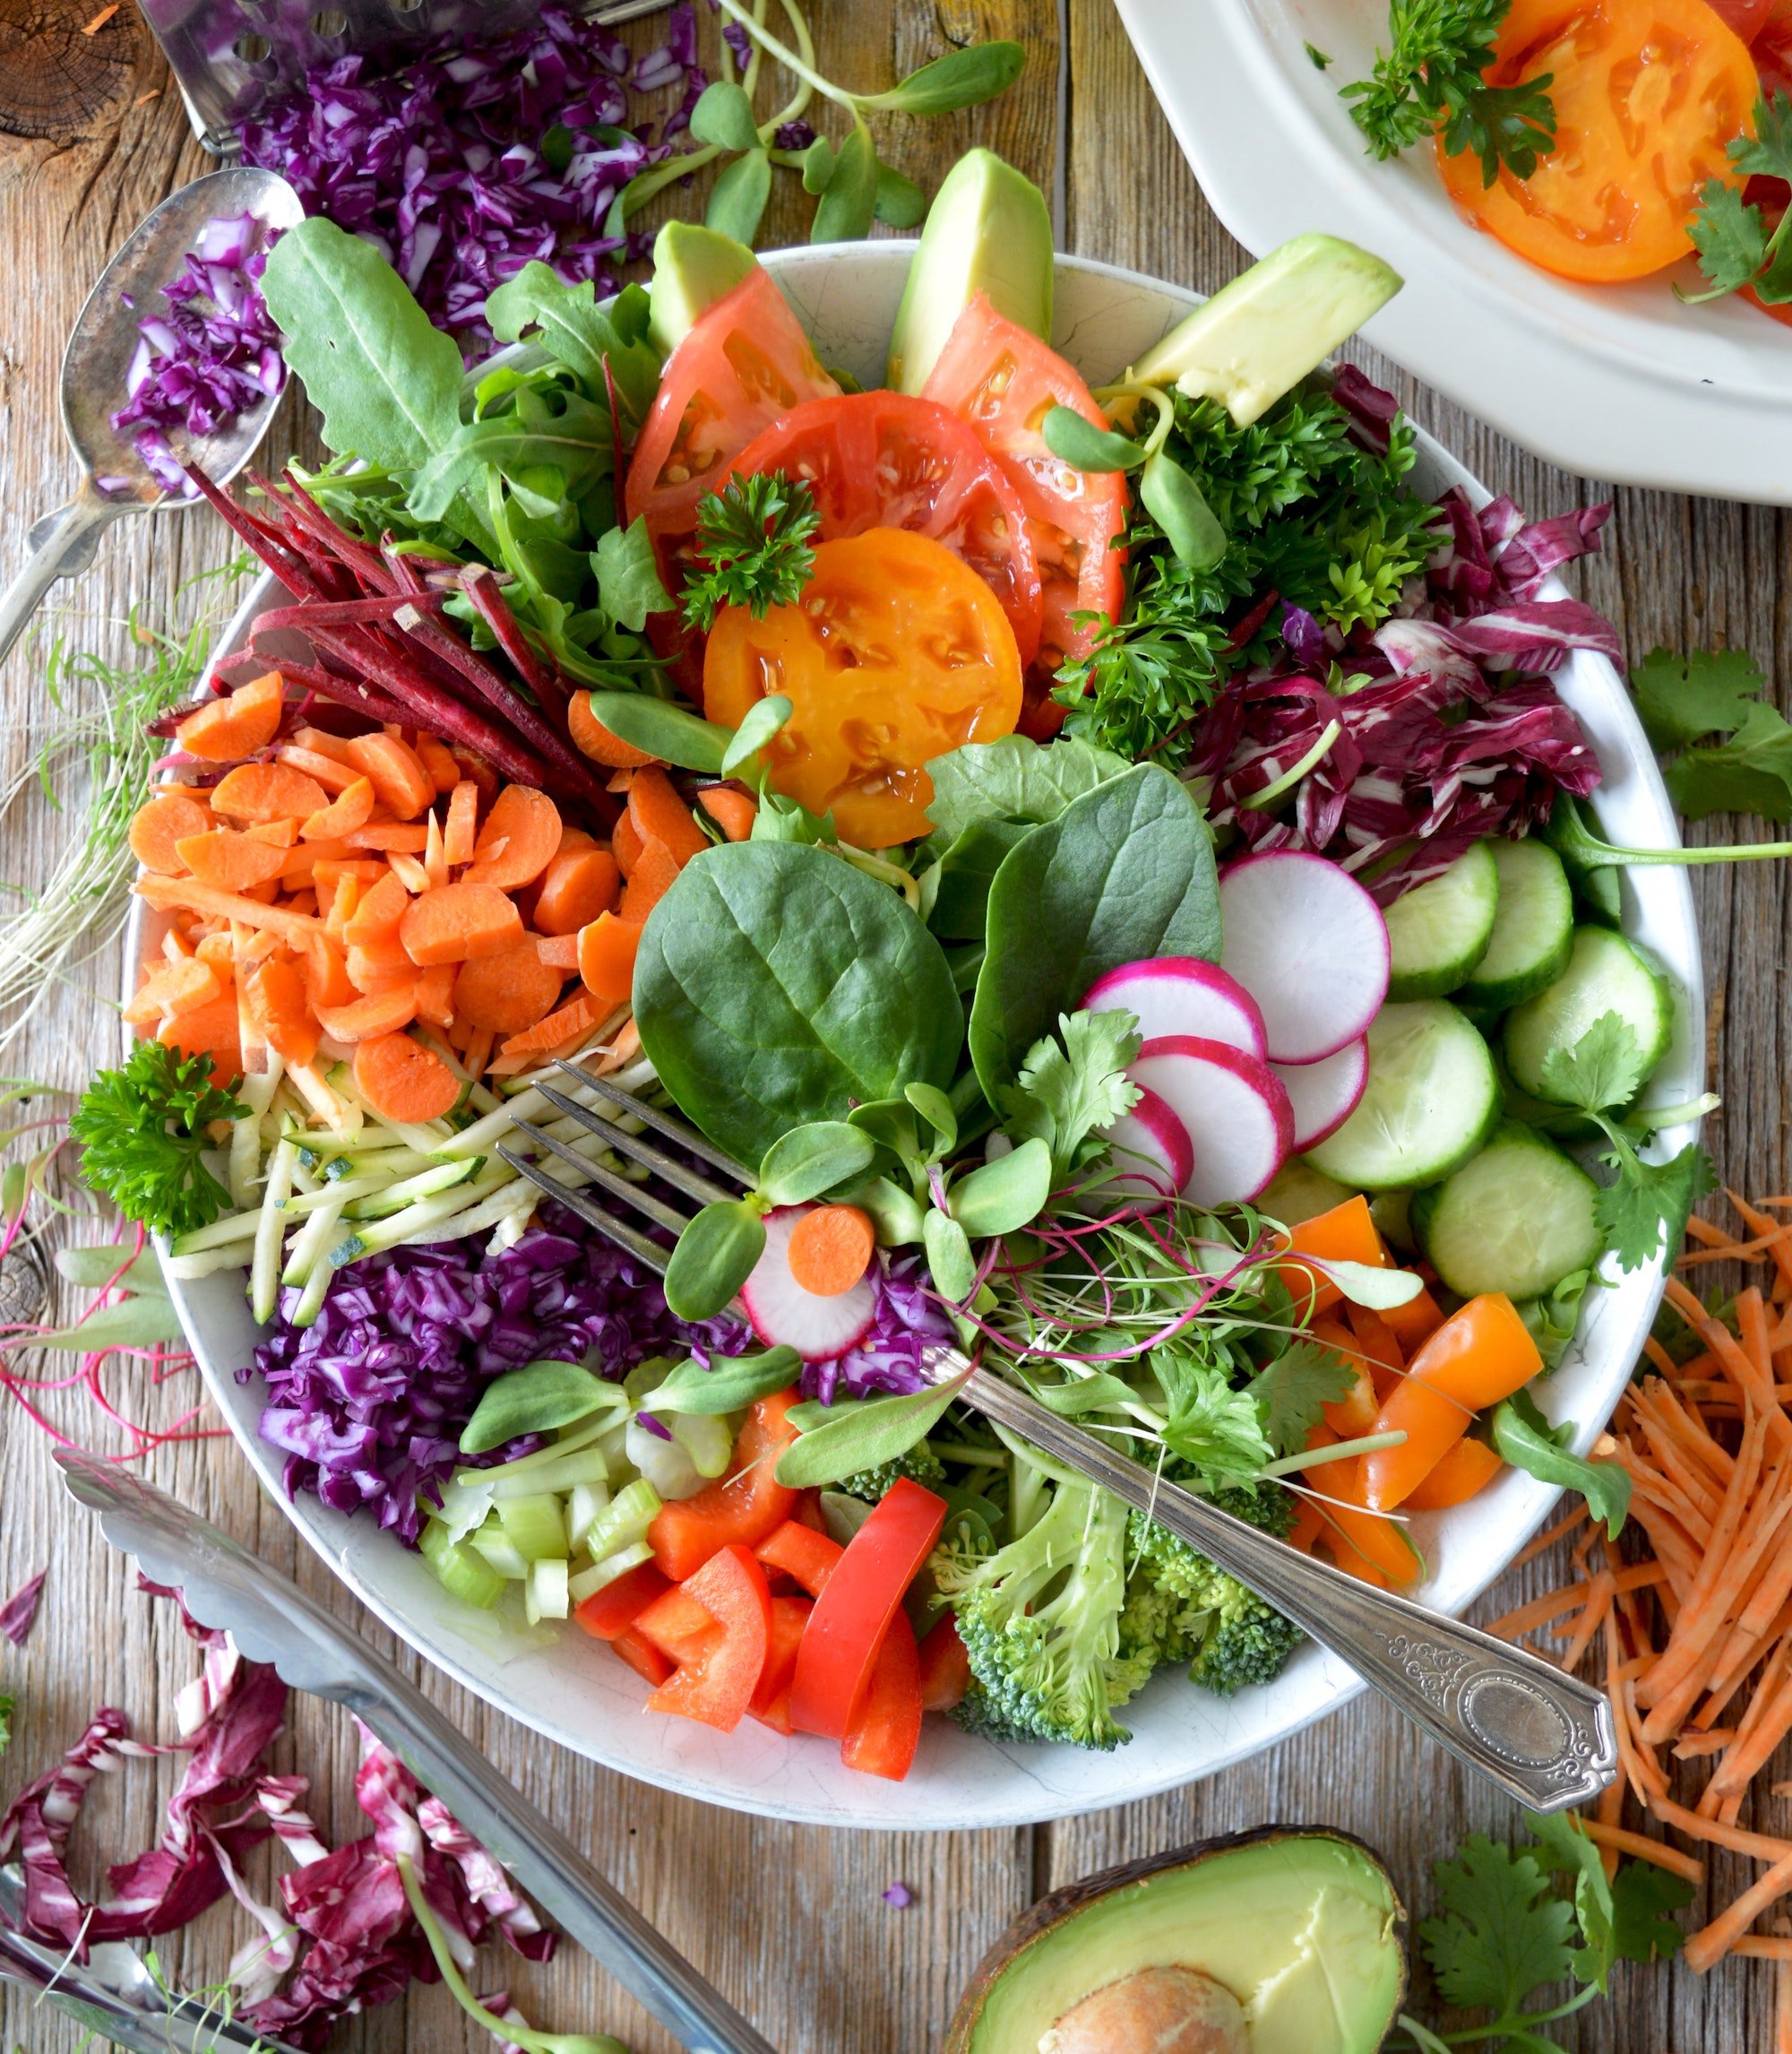 A colorful summer vegetable salad that takes advantage of summer's bounty. If you are looking for salads kids like this is it. Change it up to suit your family's tastes. 